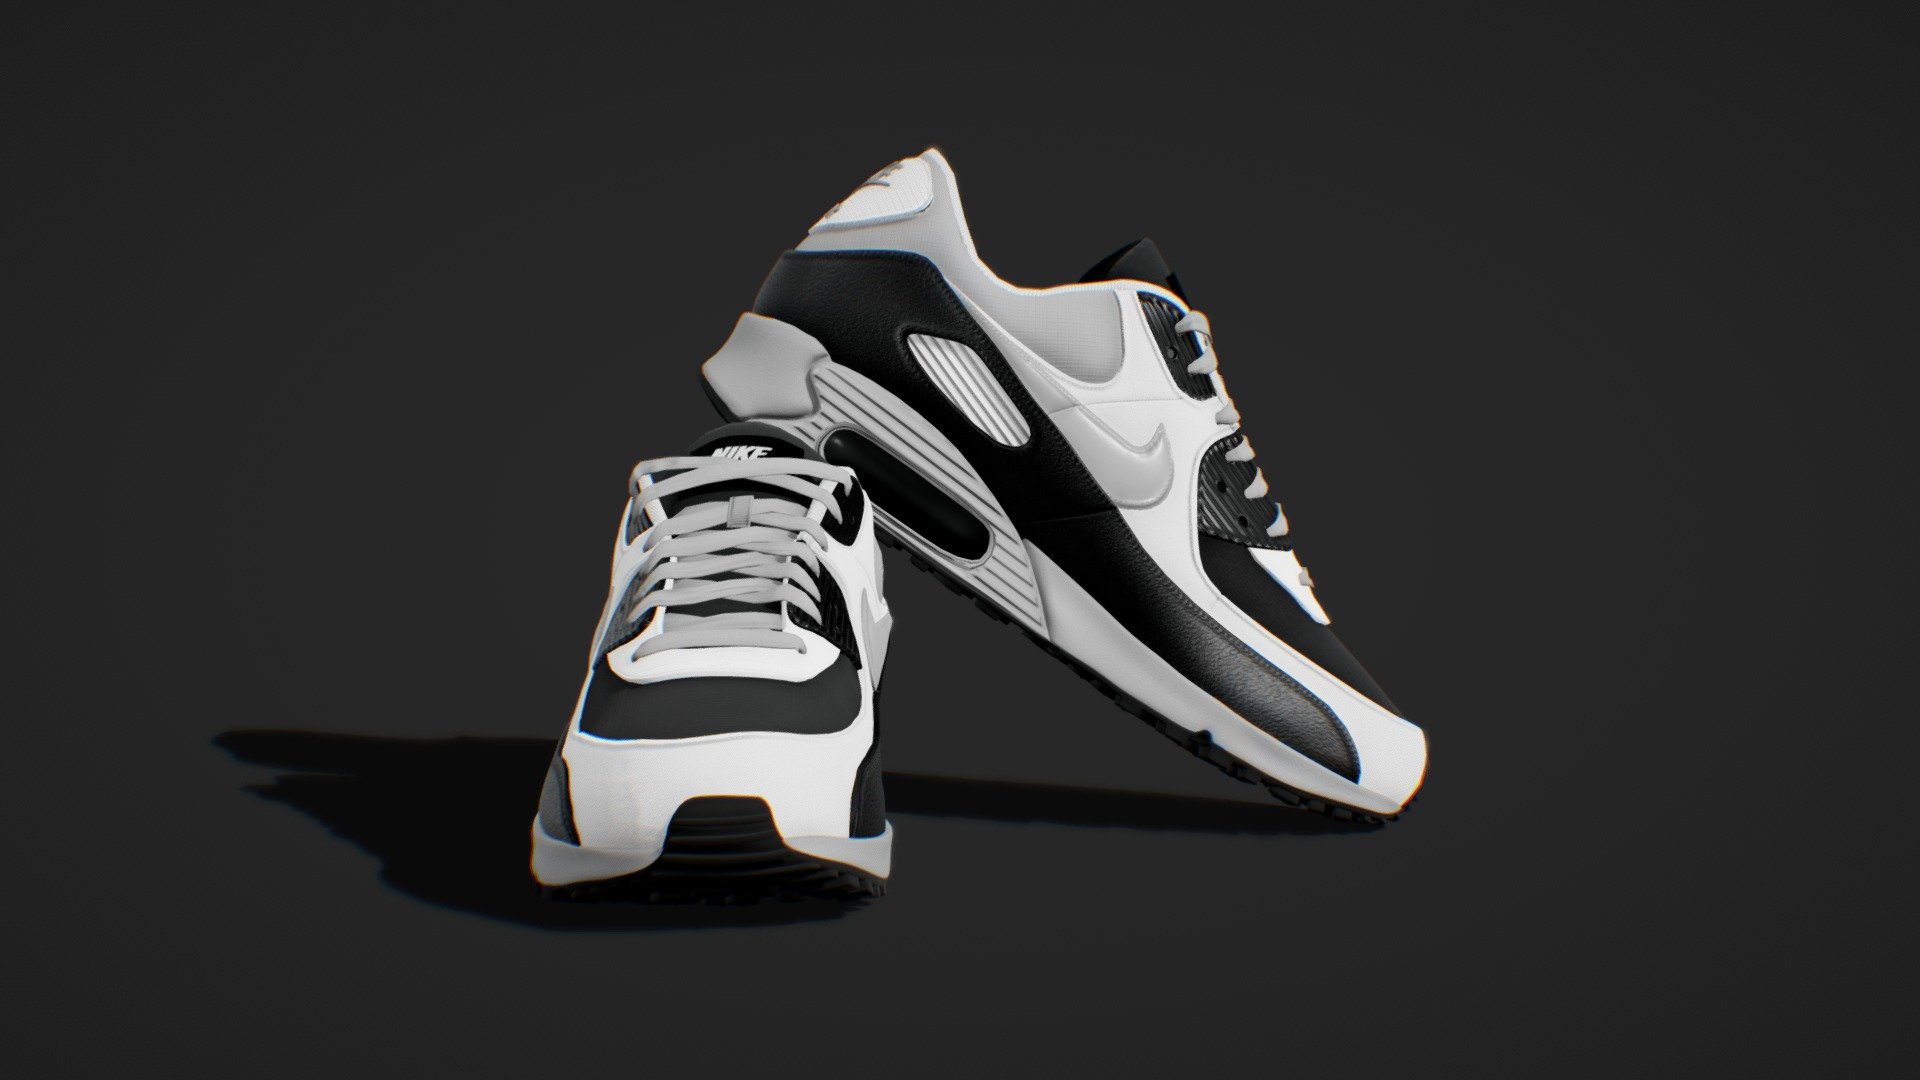 This are Airmax NIKE Shoes.
Textured differently,
There are 6 different textures and this is 1 of 6 Version.
Textures in 4k resolution.

Buy the whole pack of 6 at 50% OFF Here
https://skfb.ly/oxQVu - Airmax - Nike Shoes 01 - Buy Royalty Free 3D model by 5th Dimension (@5th-Dimension) 3d model